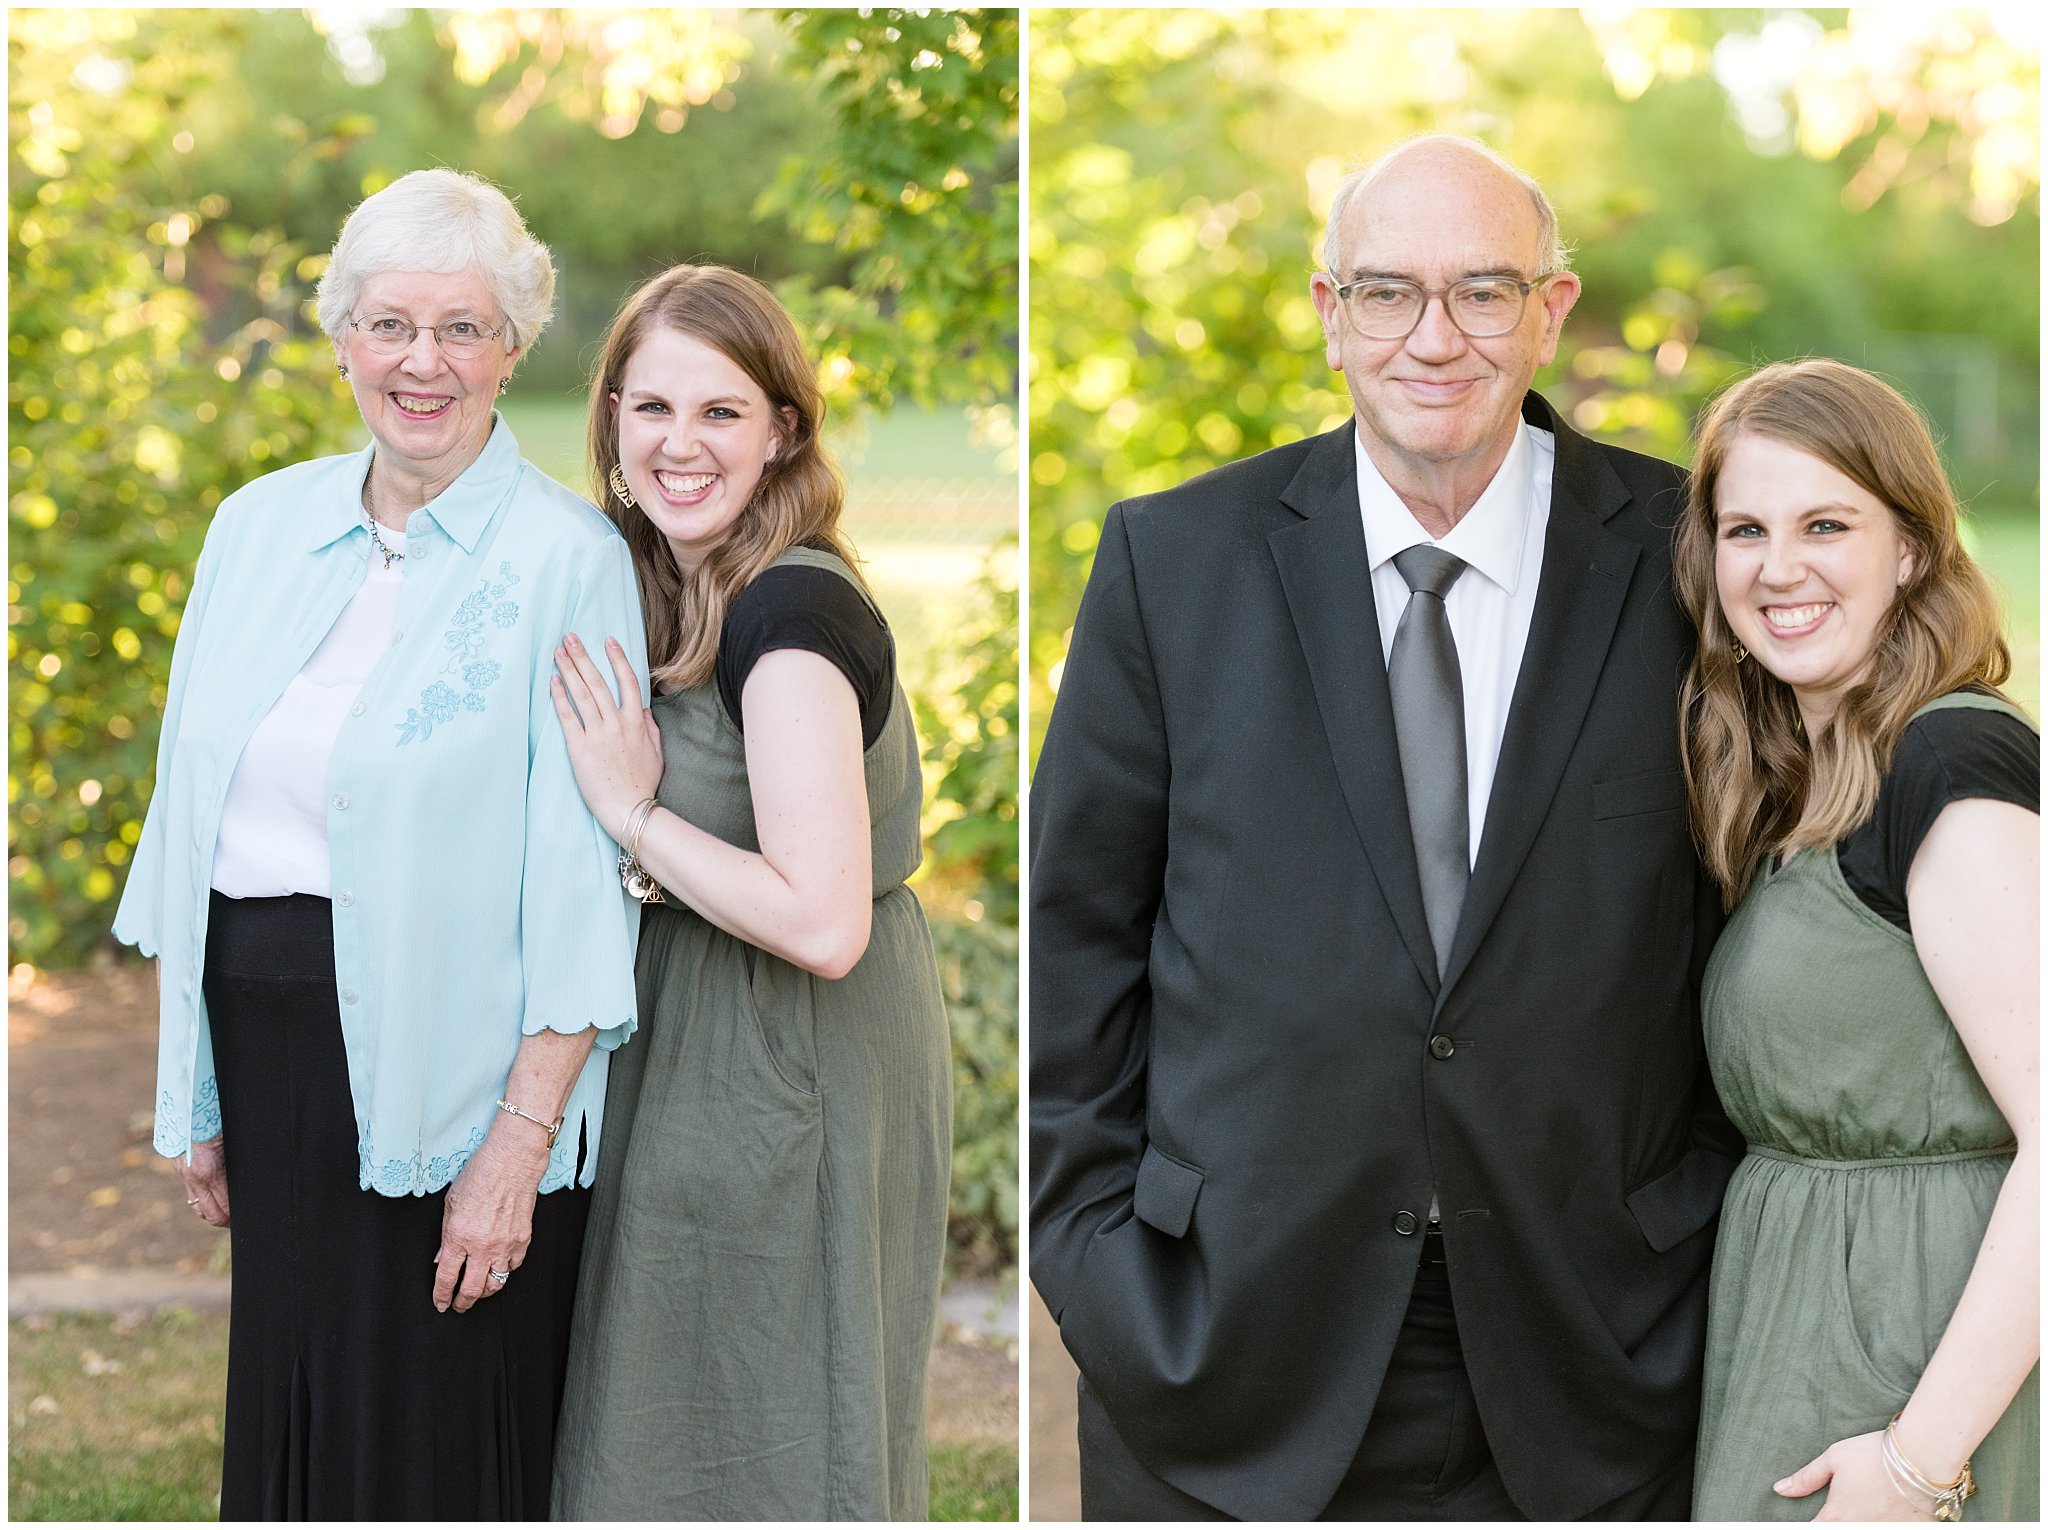 Jessie with grandparents | Layton Commons Park | Layton Couples Photographer | Jessie and Dallin